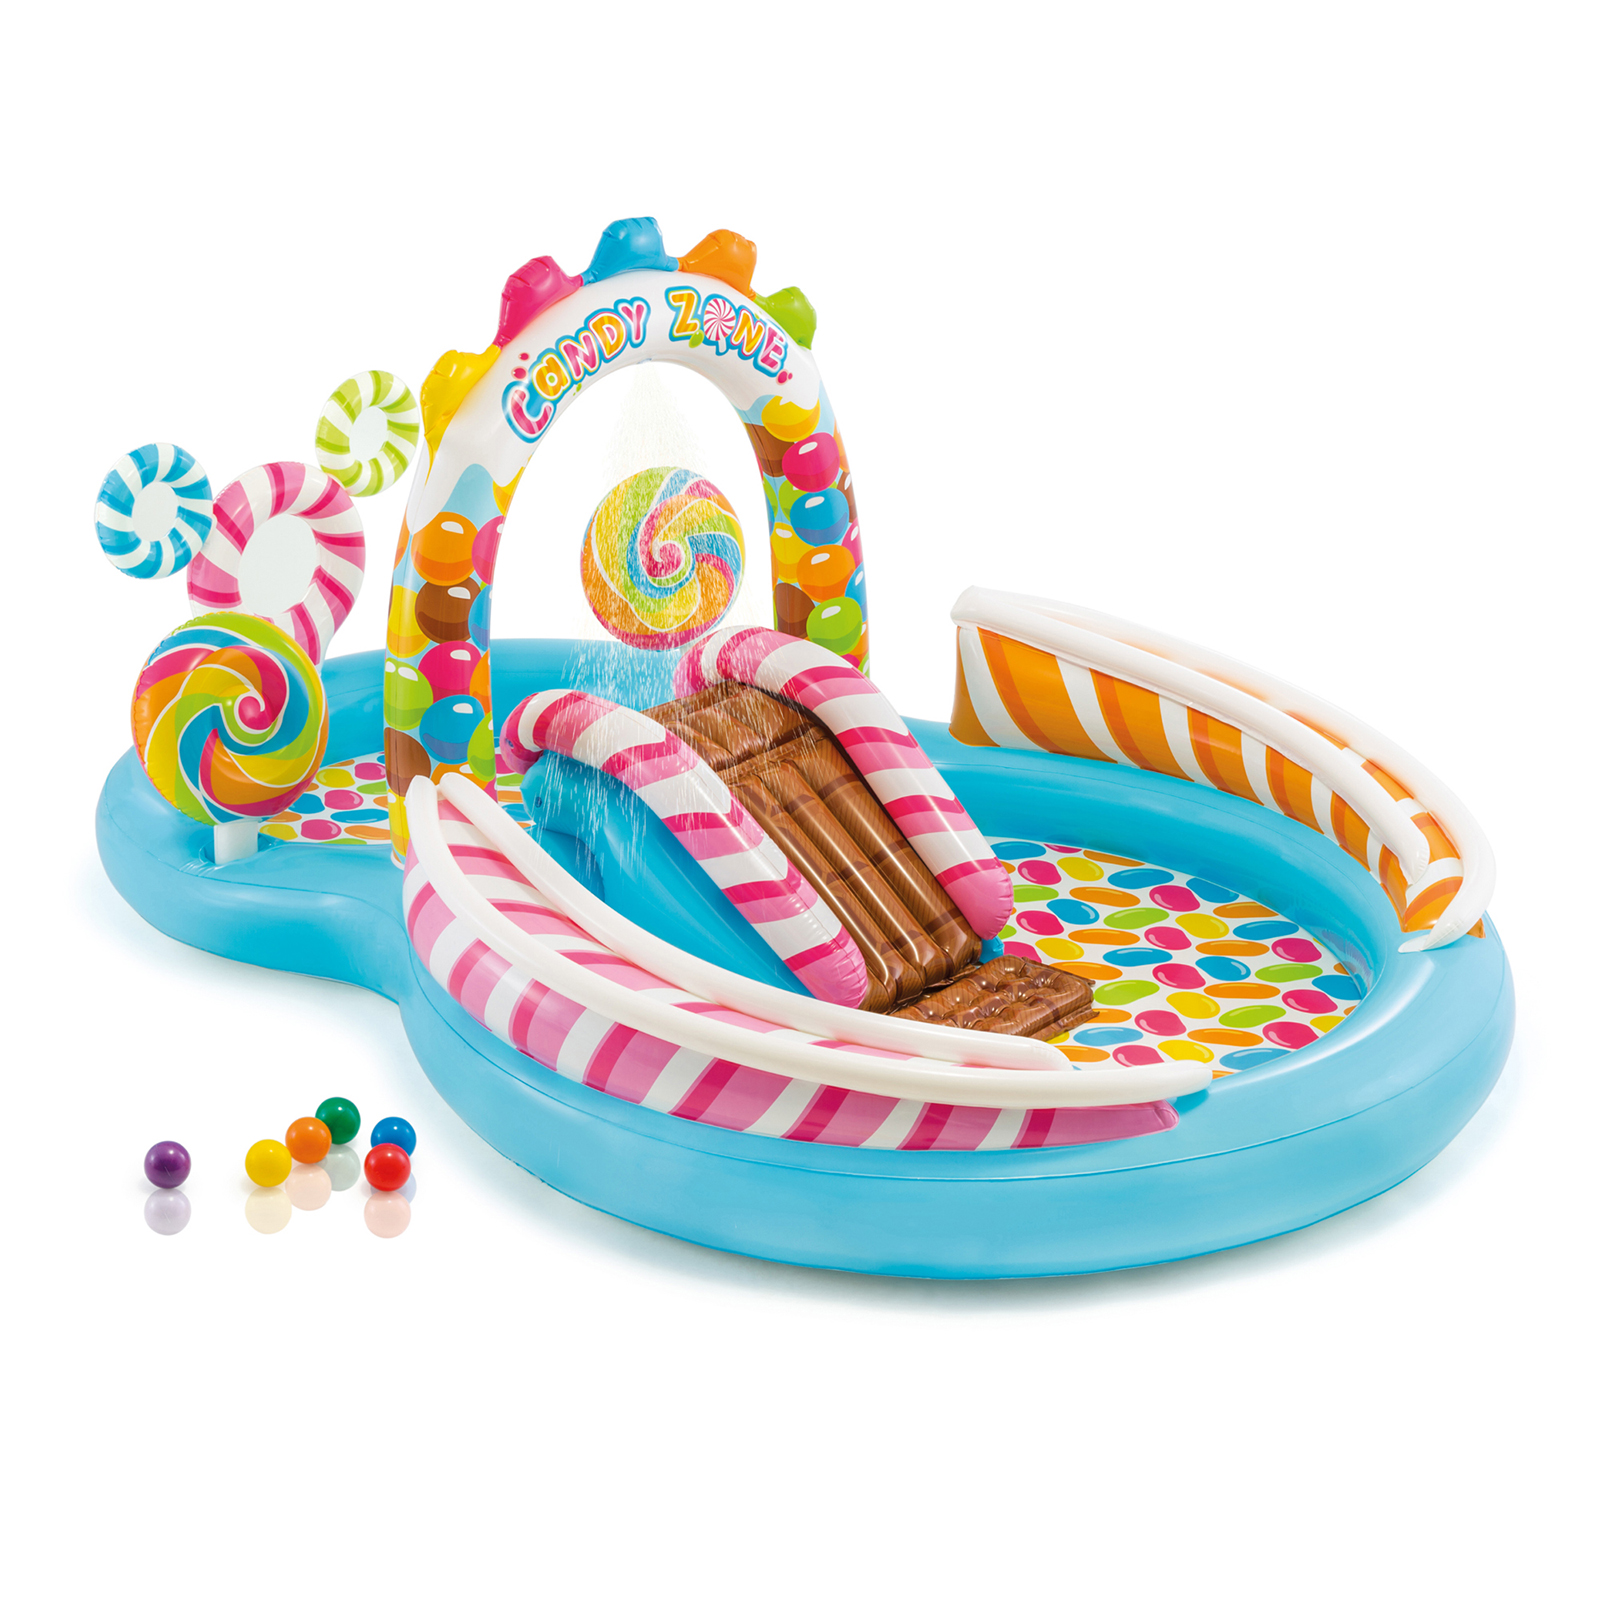 Intex Candy Zone Pool & Play Center